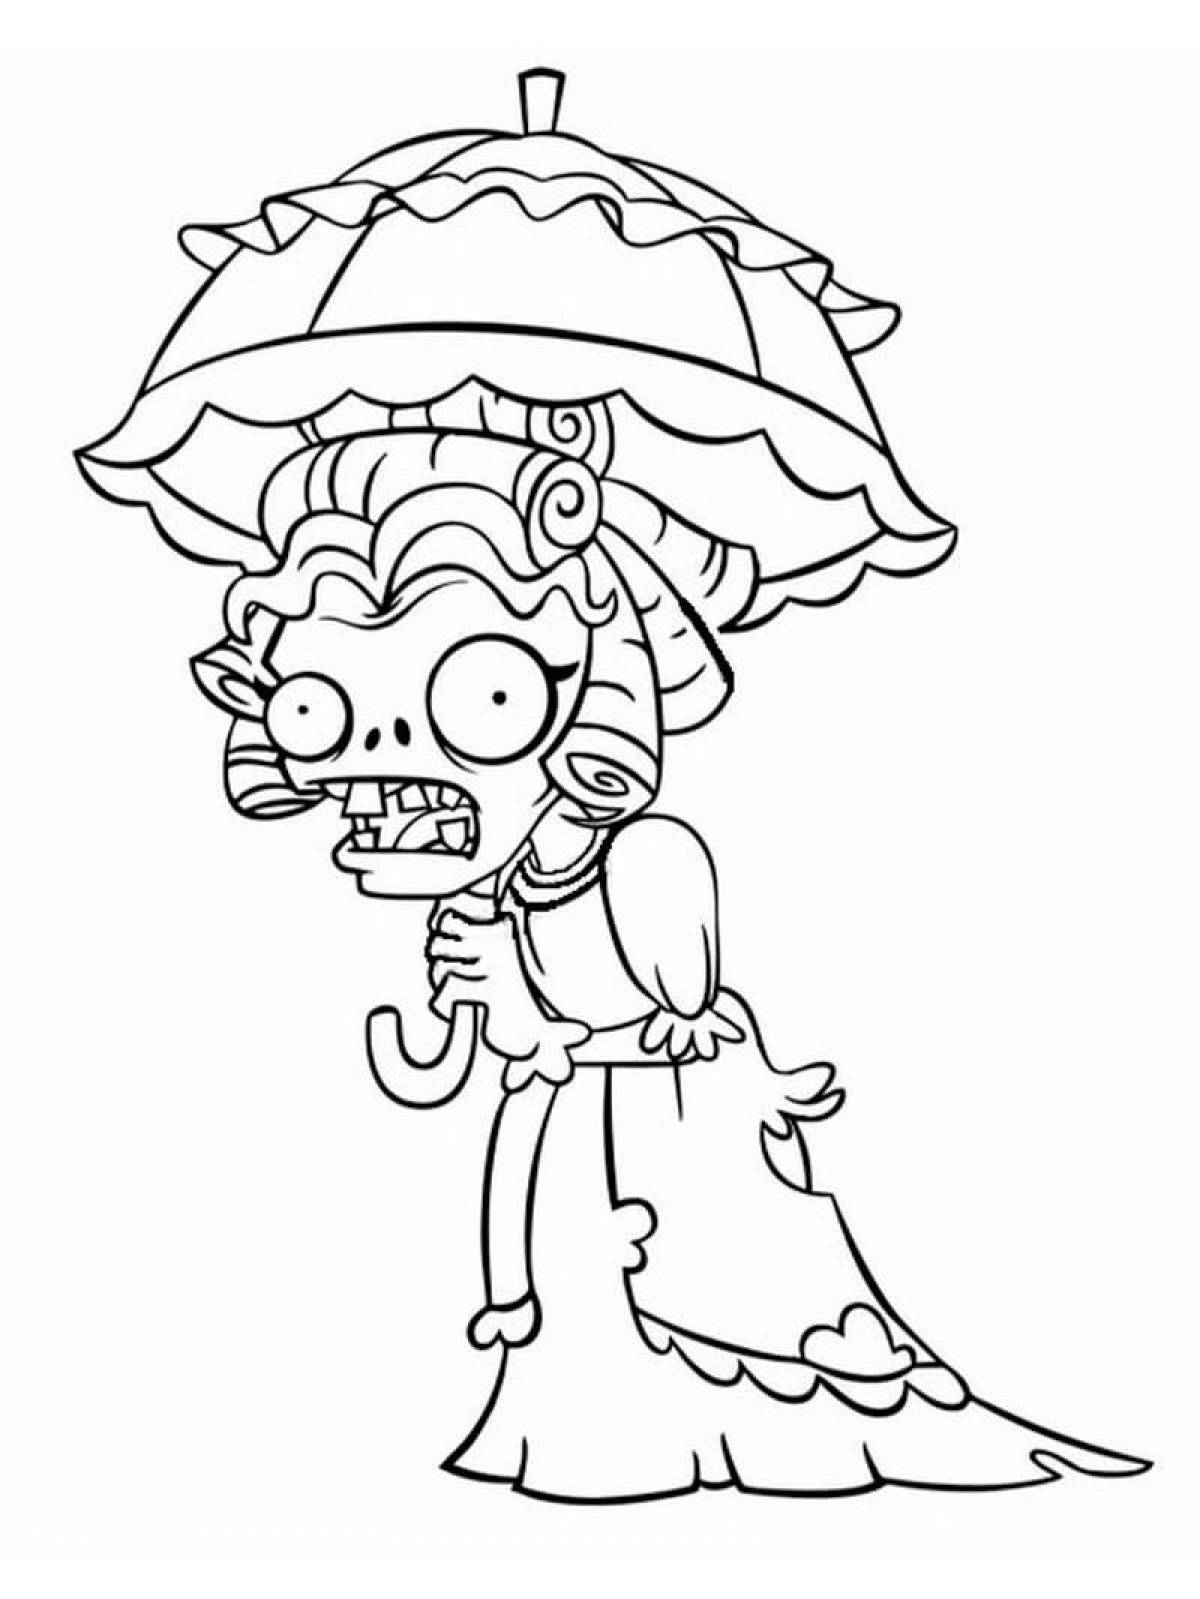 Zombie nasty coloring page